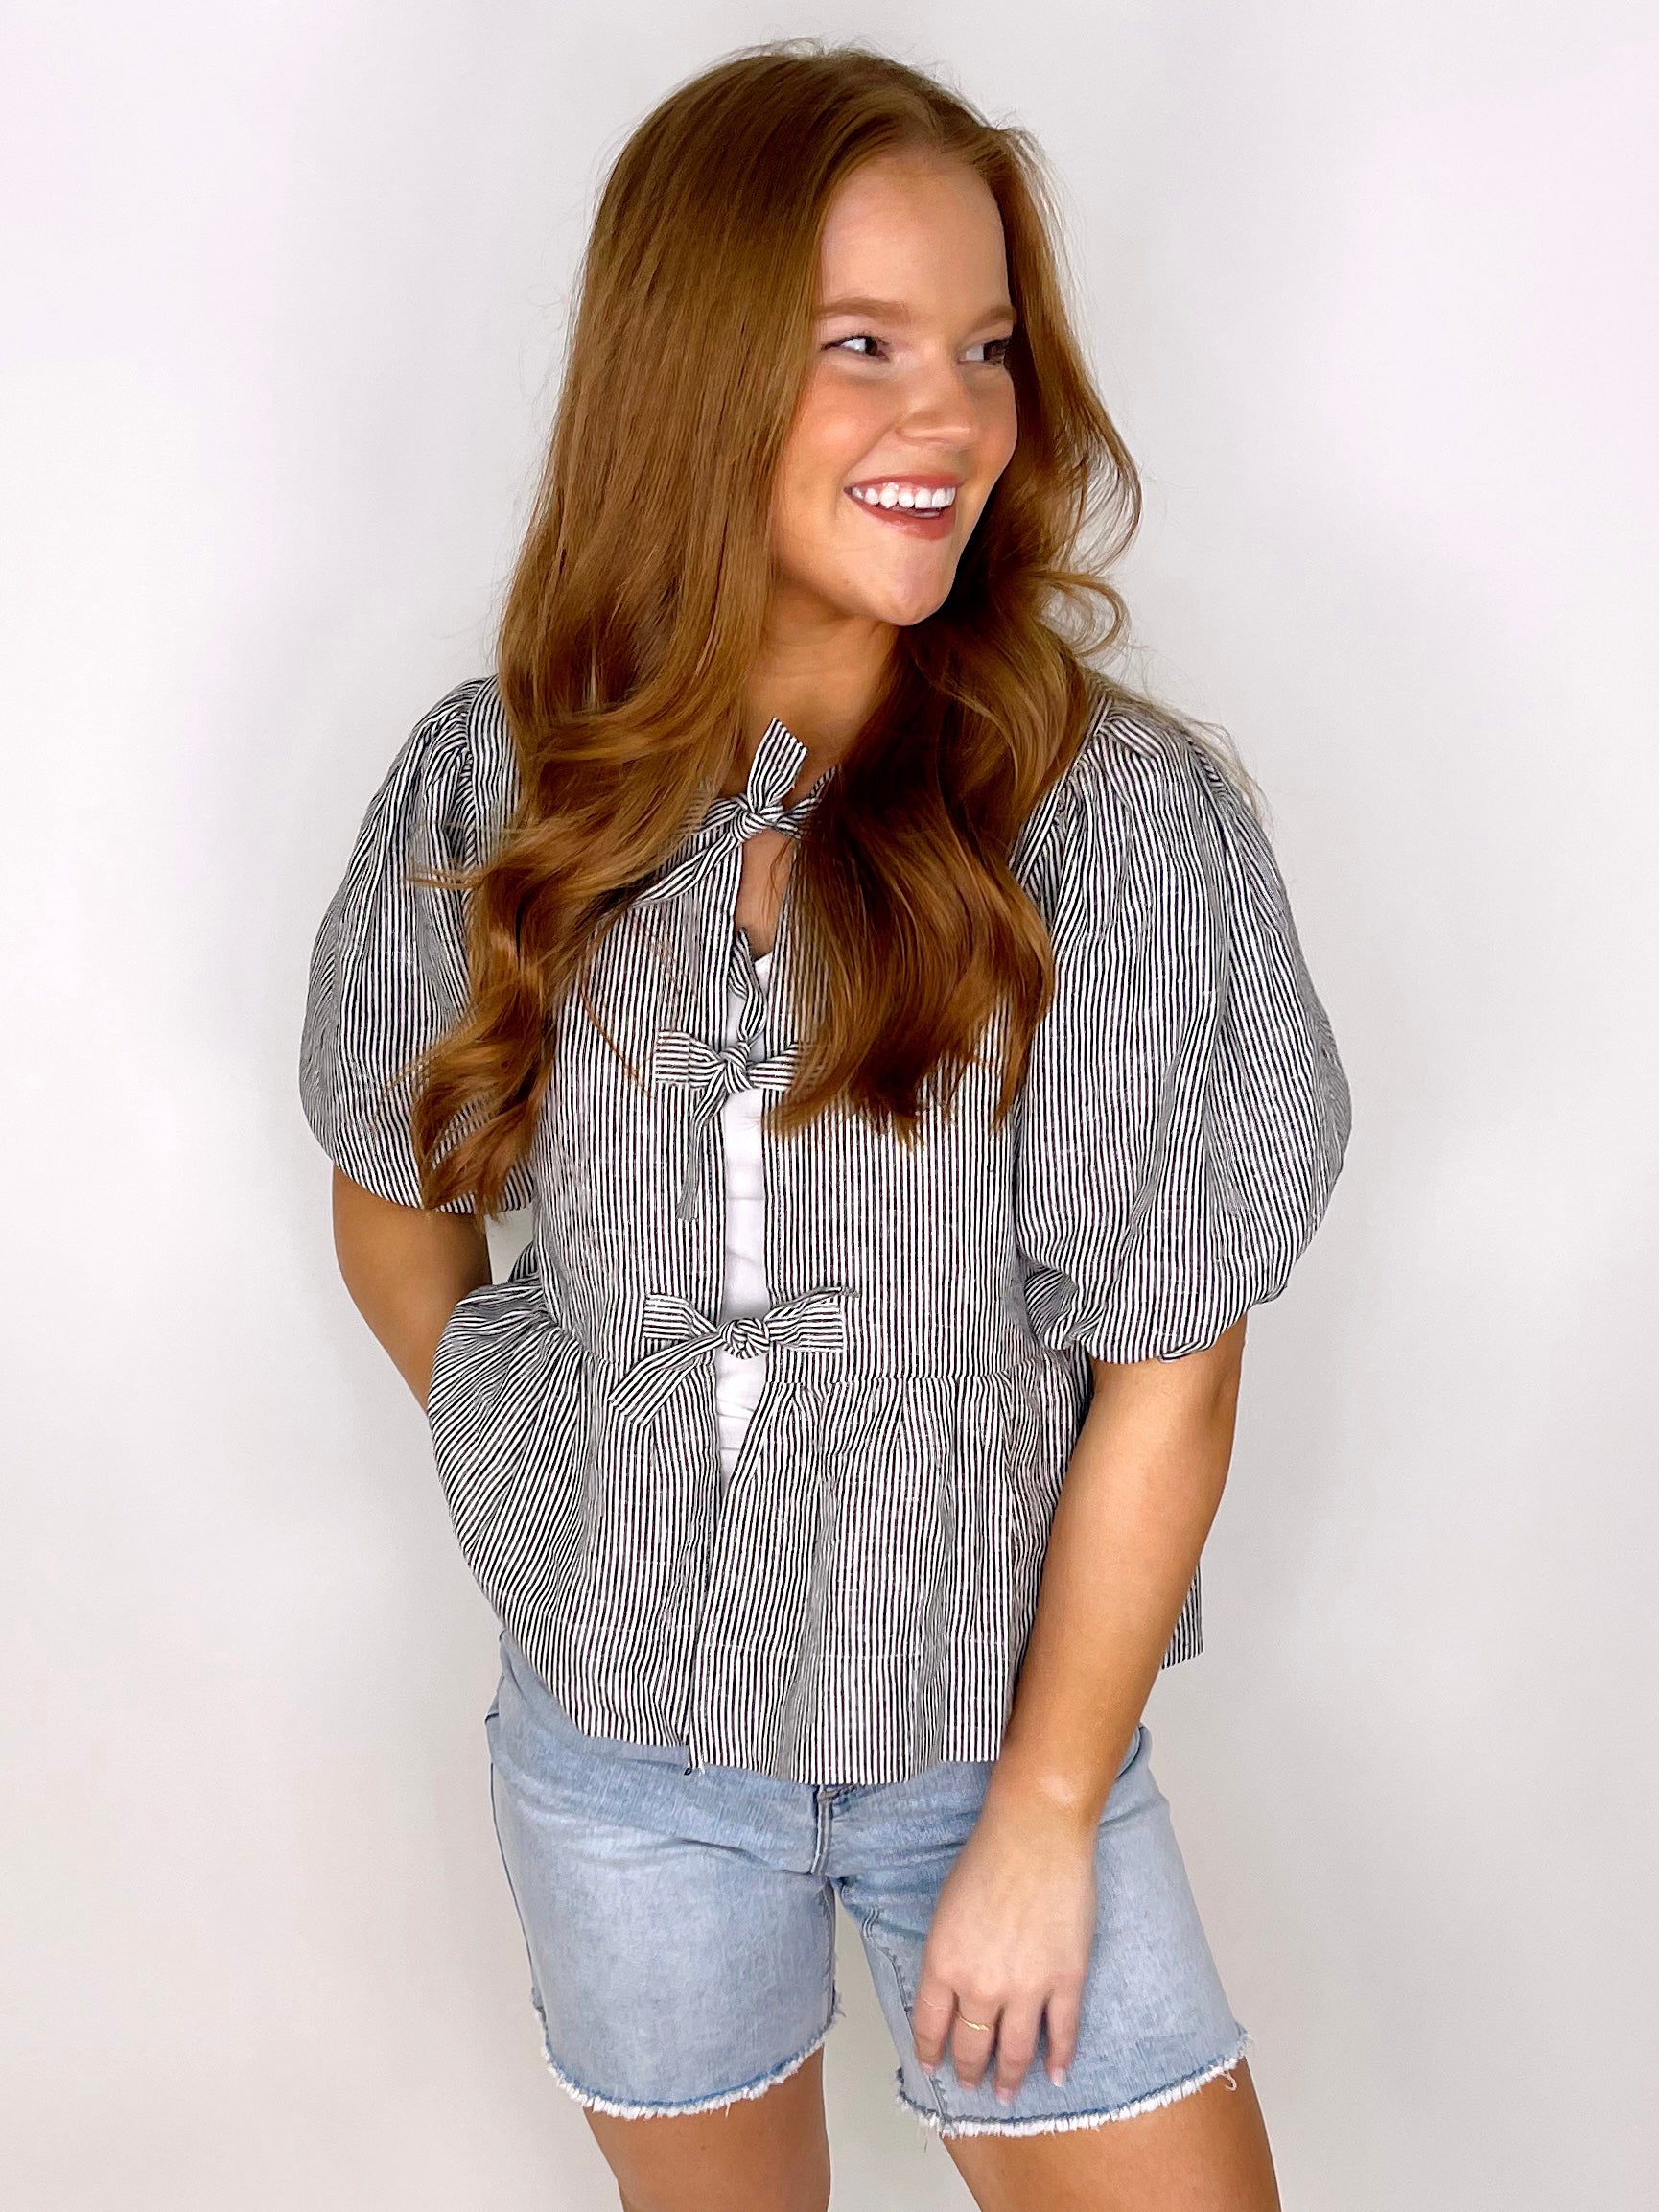 The August Top-Blouse-Olivaceous-The Village Shoppe, Women’s Fashion Boutique, Shop Online and In Store - Located in Muscle Shoals, AL.